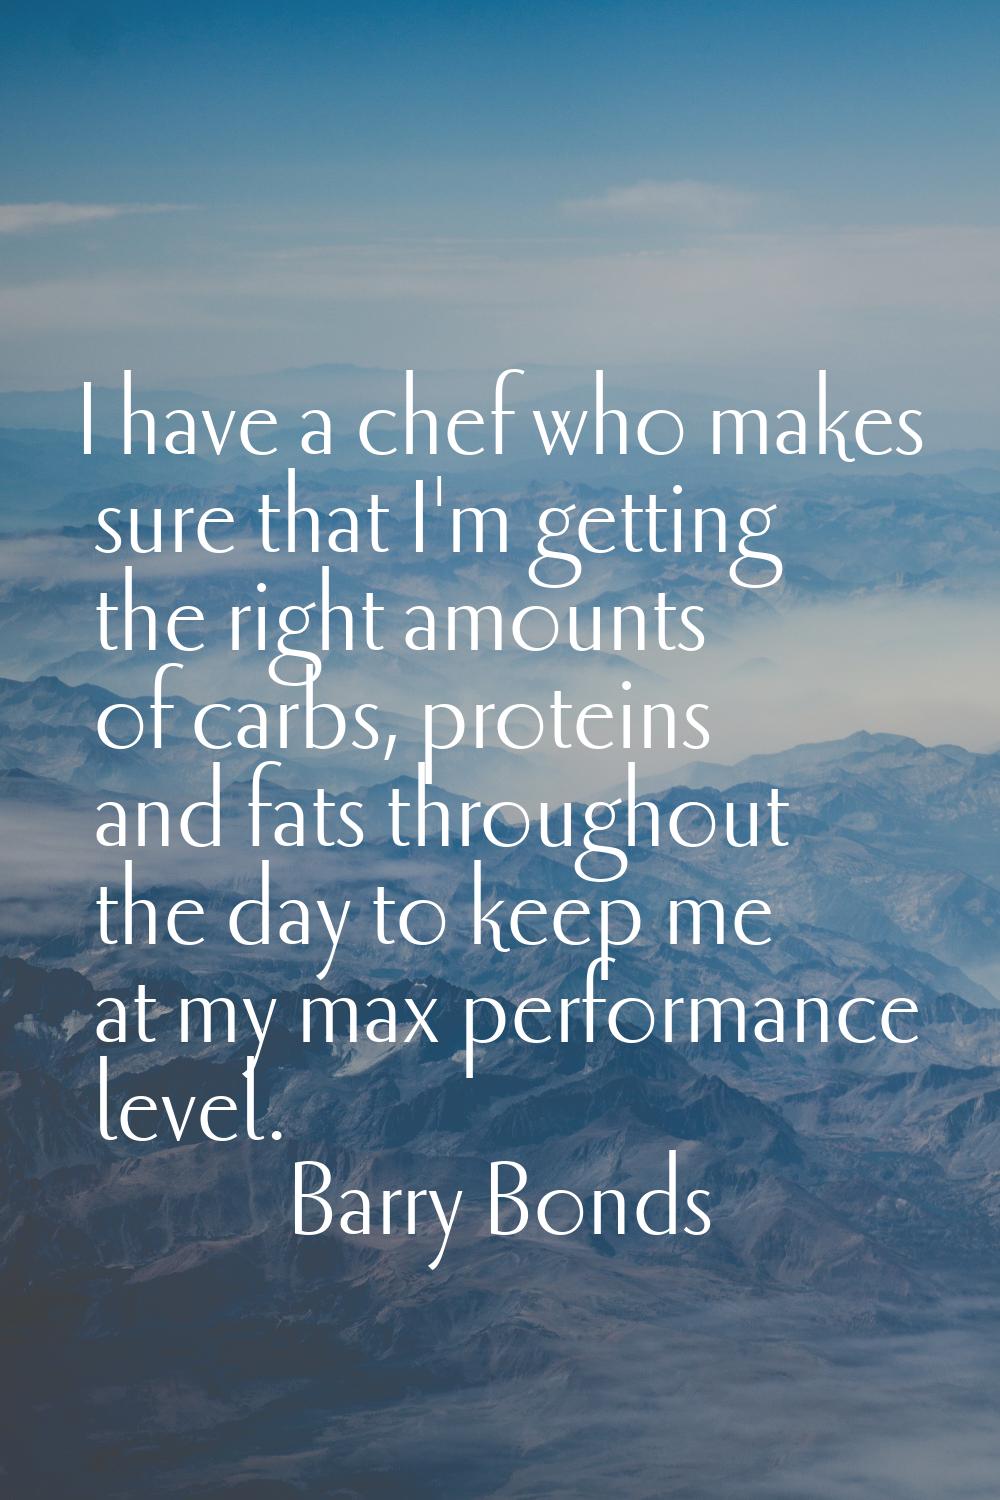 I have a chef who makes sure that I'm getting the right amounts of carbs, proteins and fats through